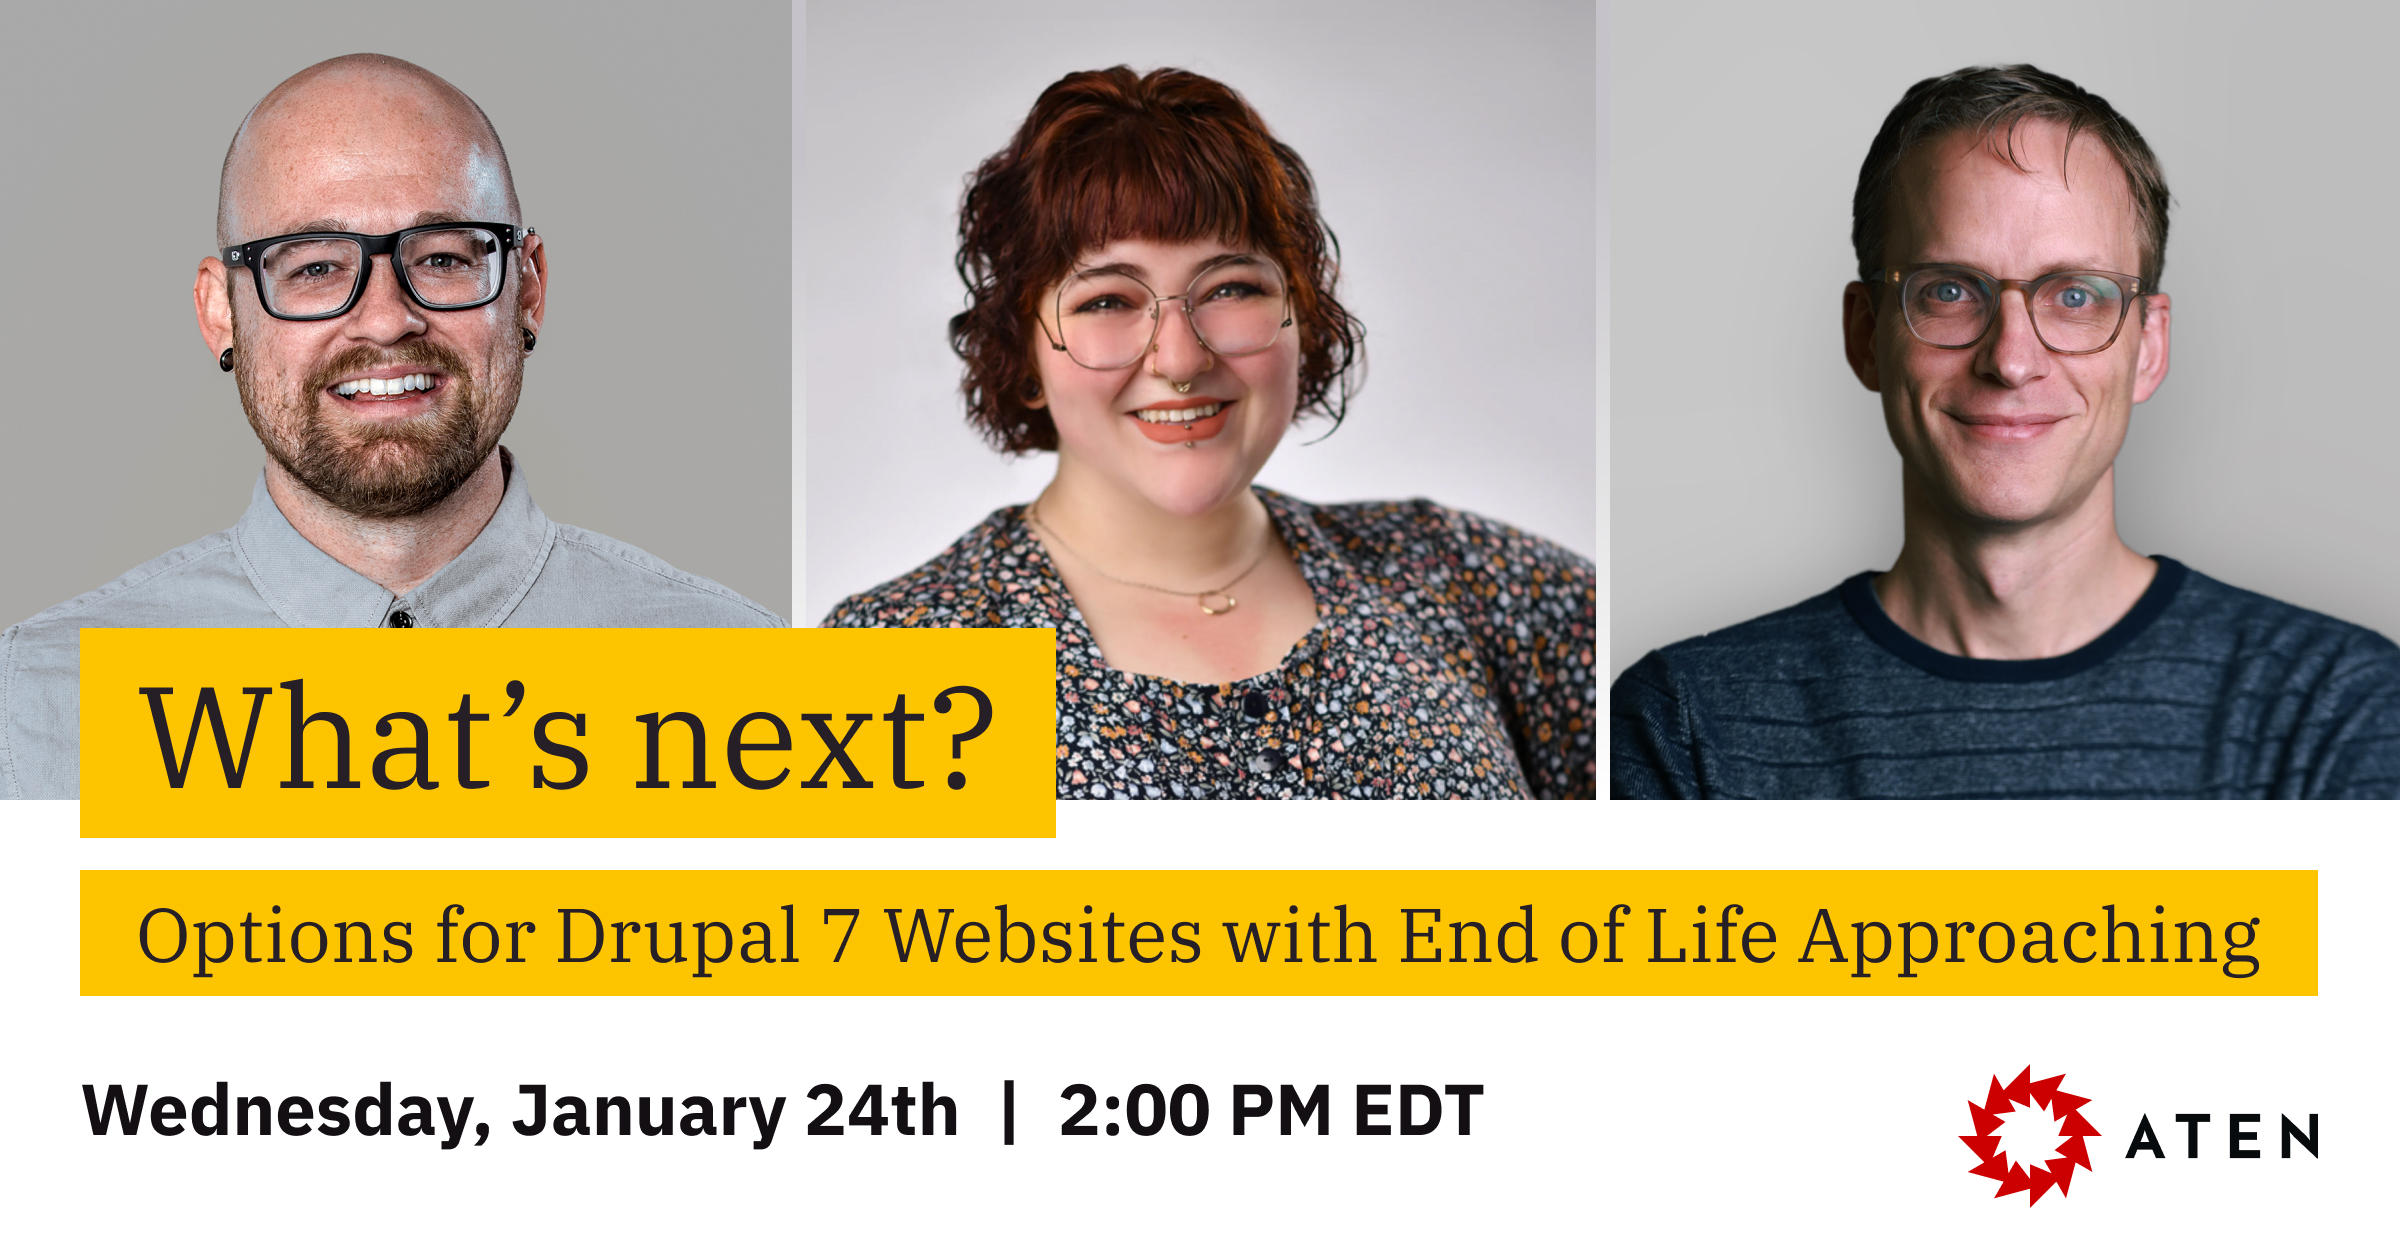 What Next? Options for Drupal 7 Websites with End of Life Approaching